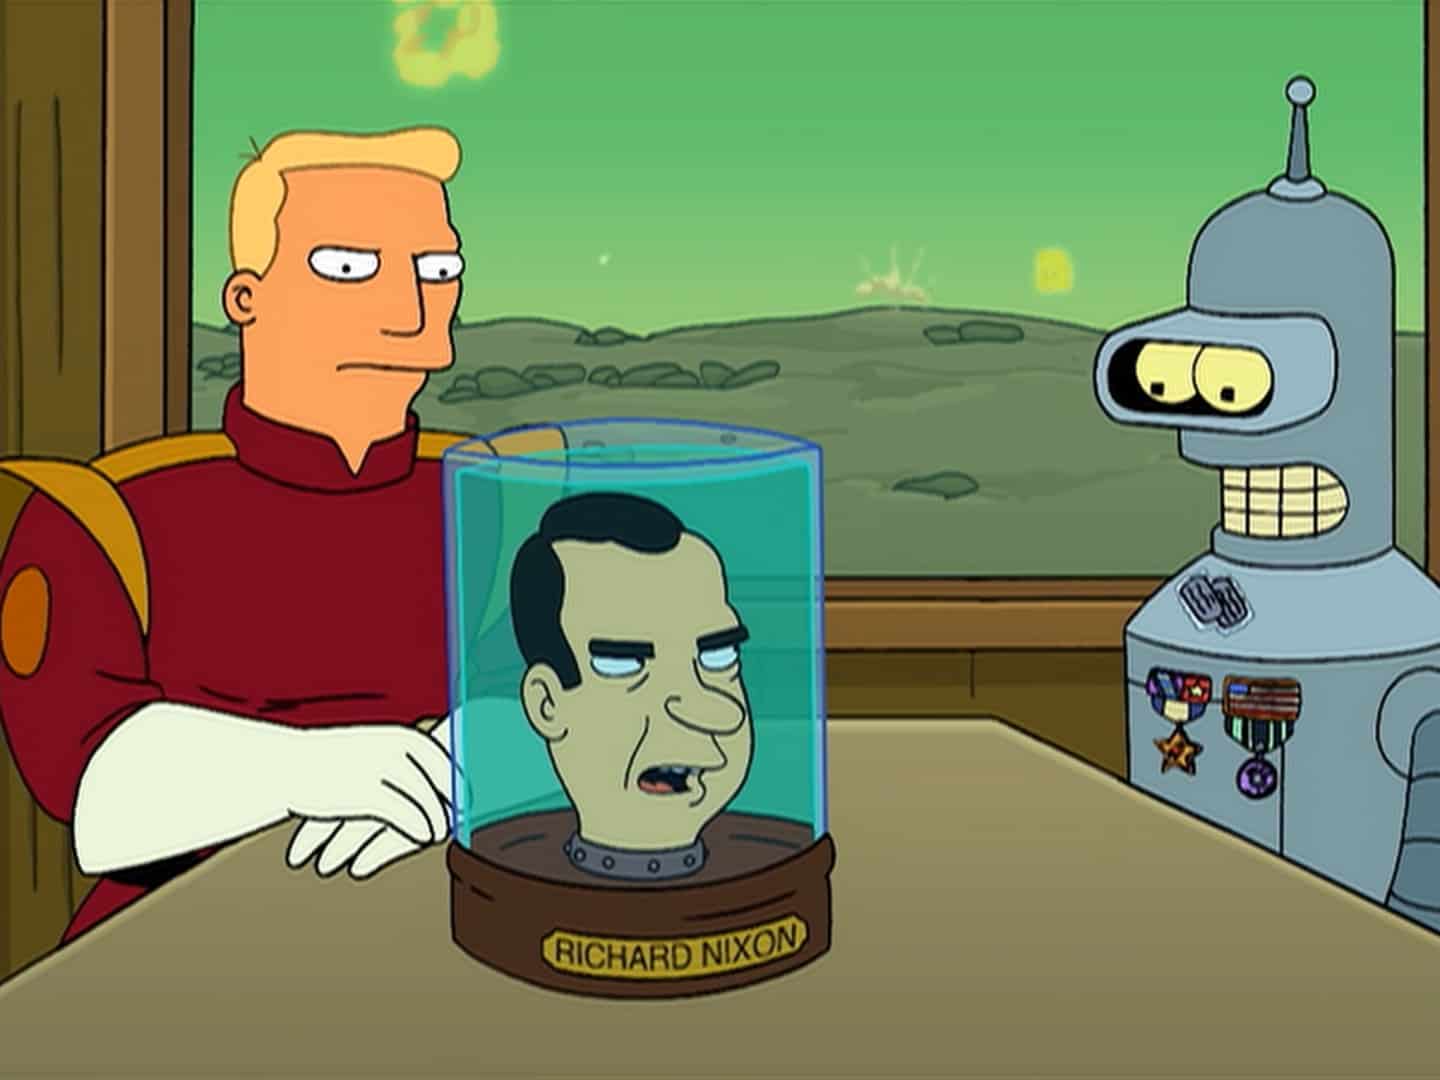 Zapp Brannigan, Richard Nixon, and Bender in this image from 20th Century Fox Television